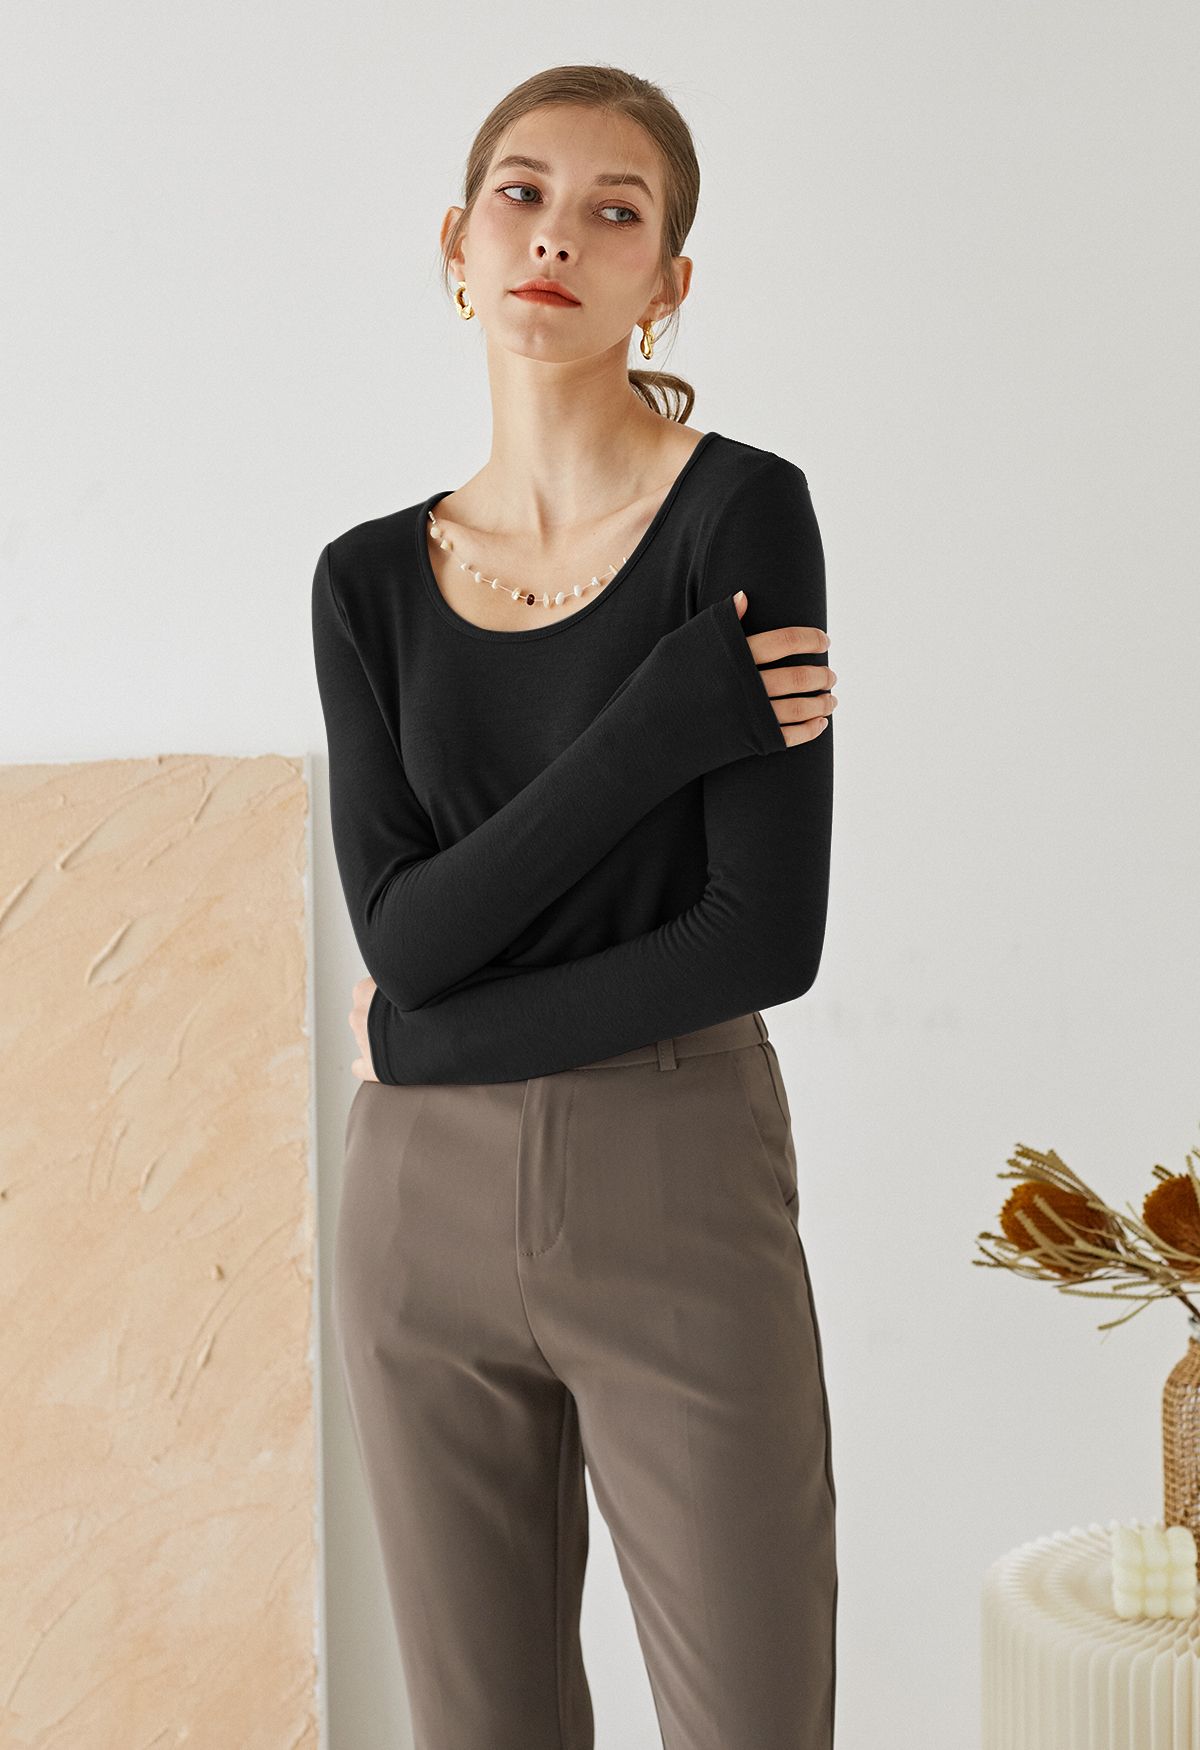 Pebble Necklace Long Sleeve Top in Black